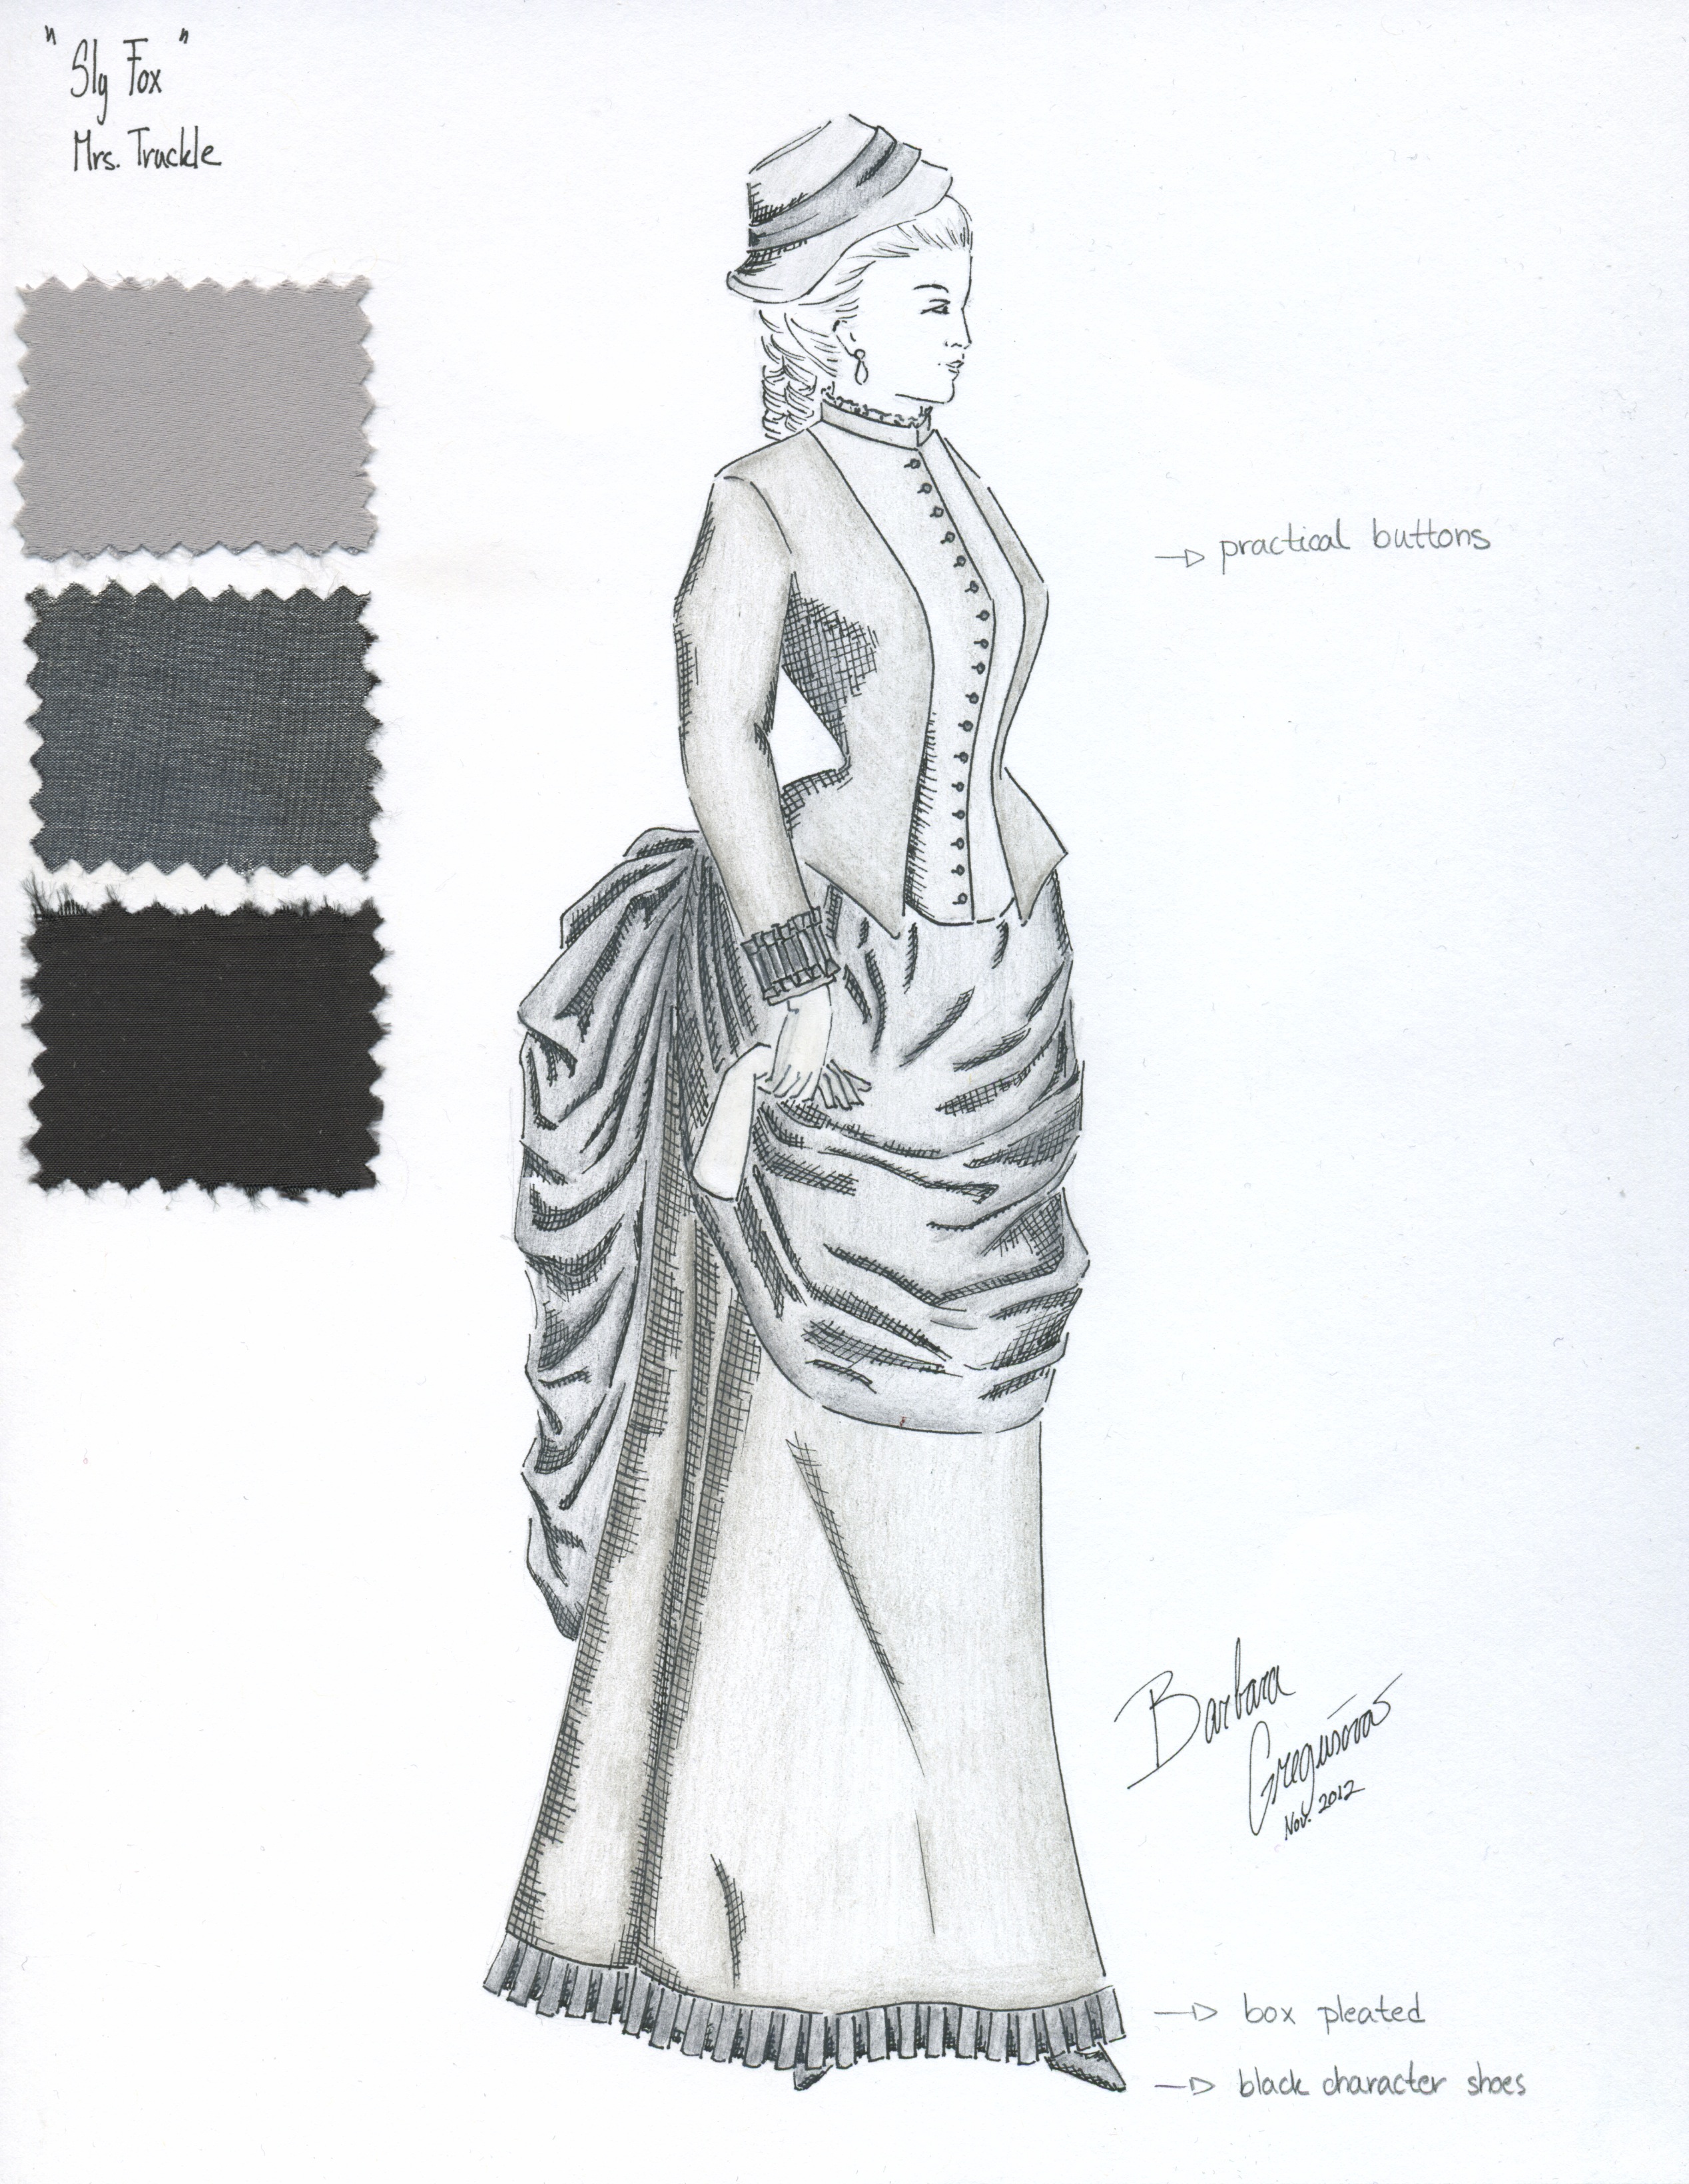 Costume Design Sketch for Mrs. Truckle in 